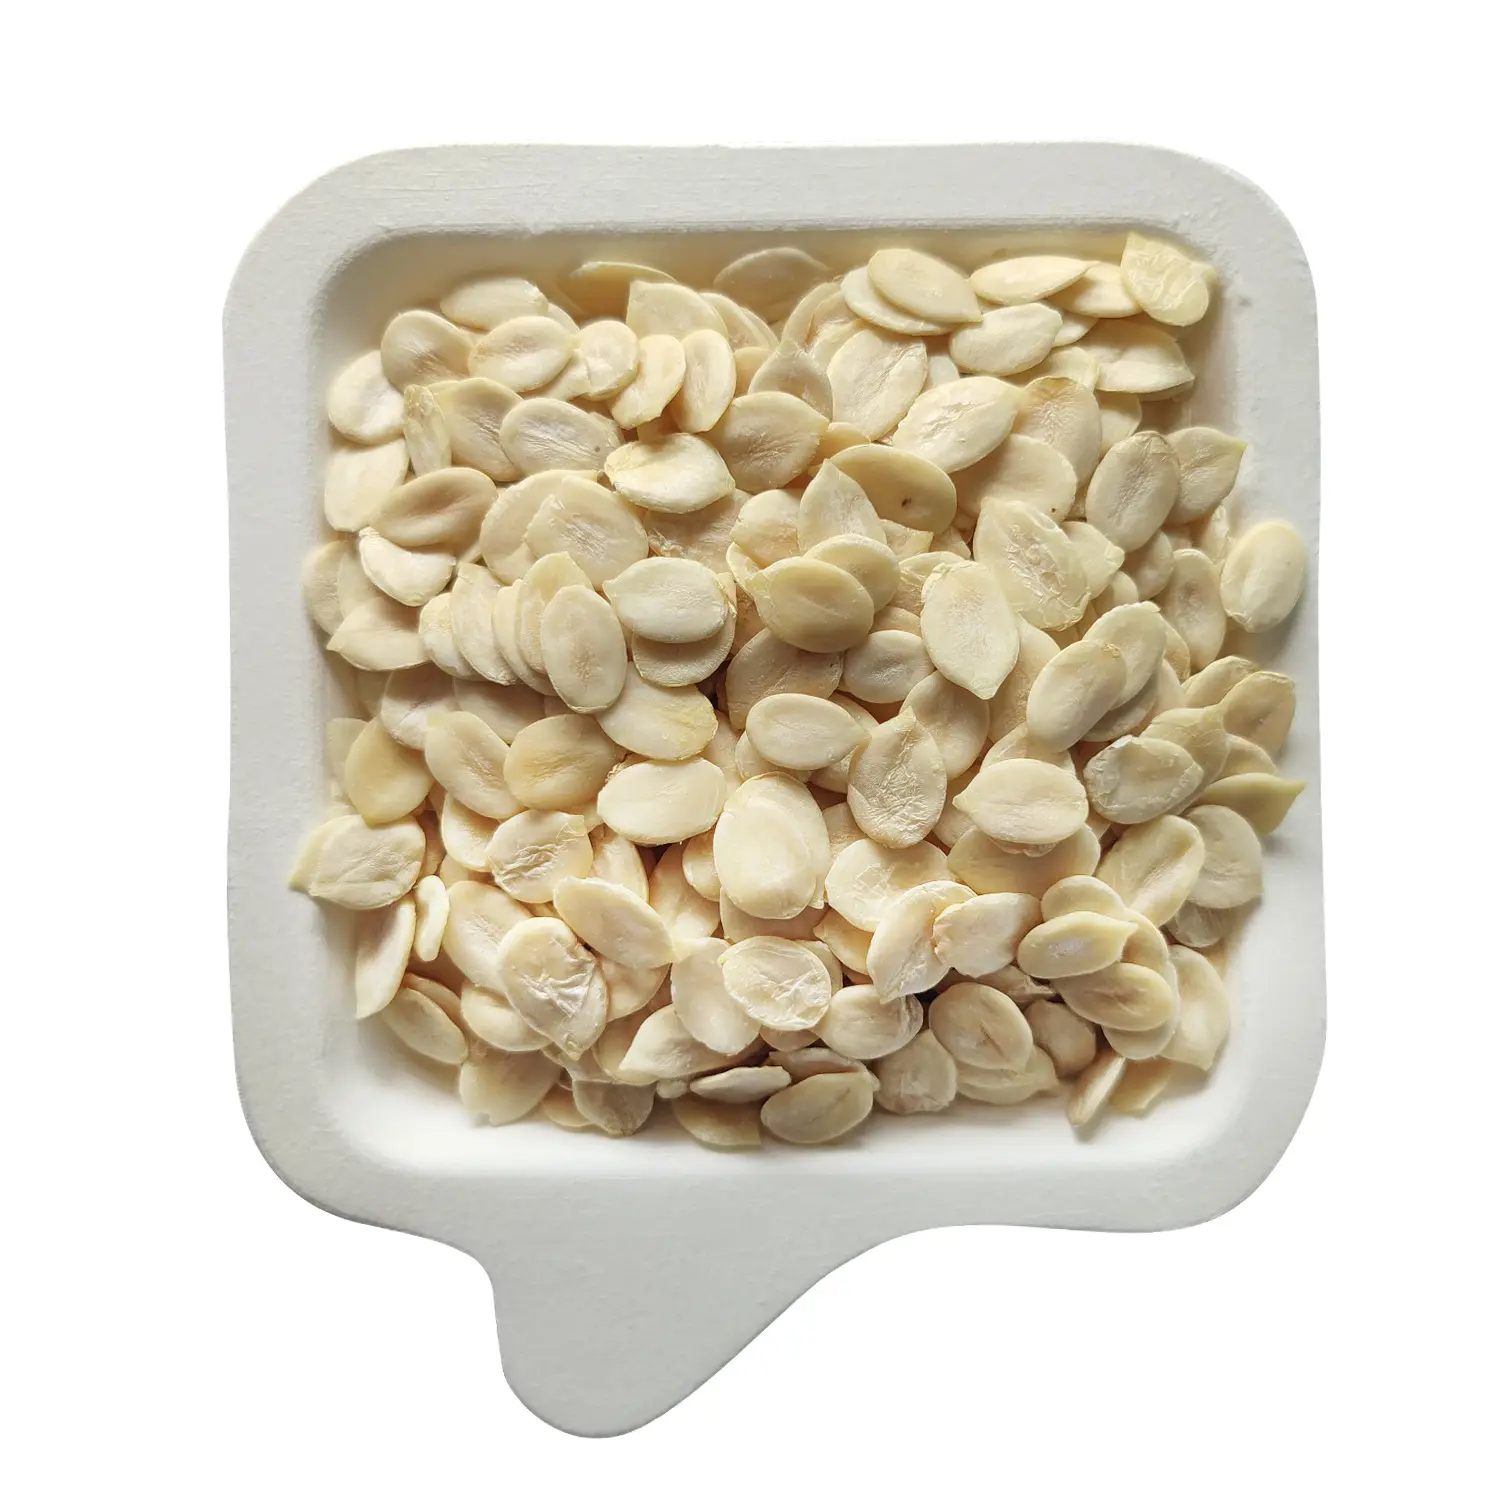 sliced almonds blanched